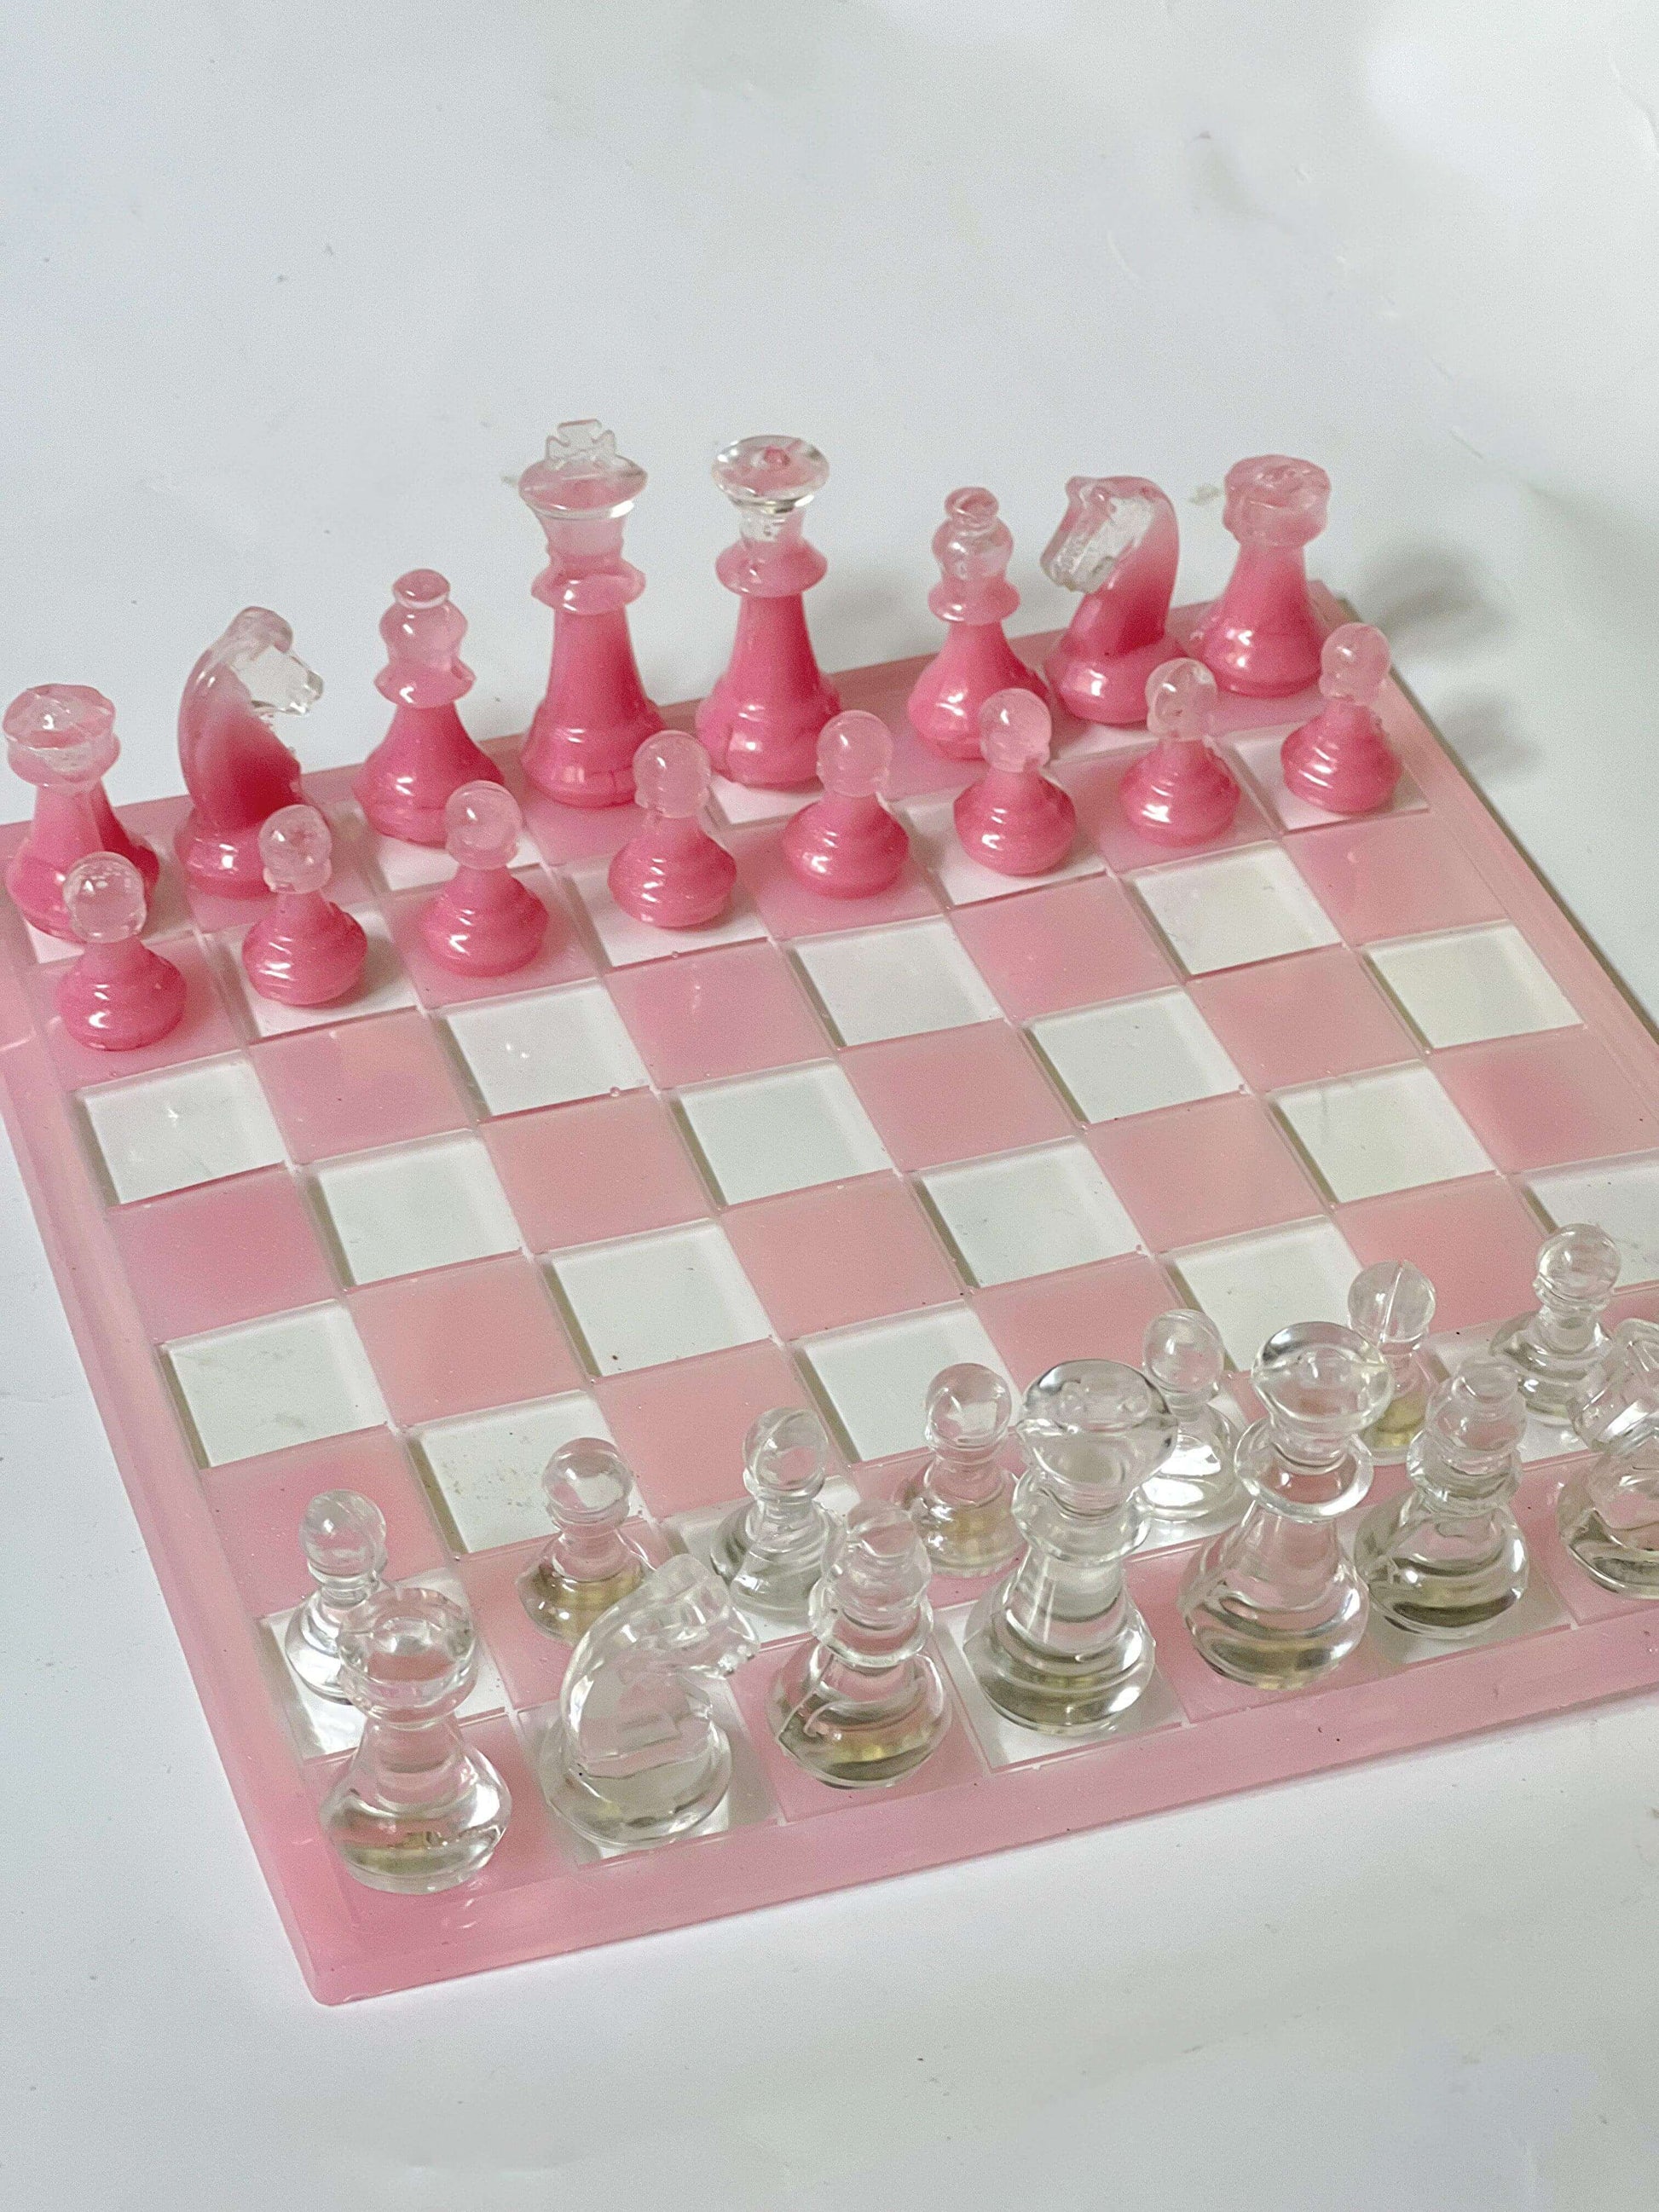 A chess board set up for a strategic game in hyper realistic brilliant neon  rainbow cyber punk